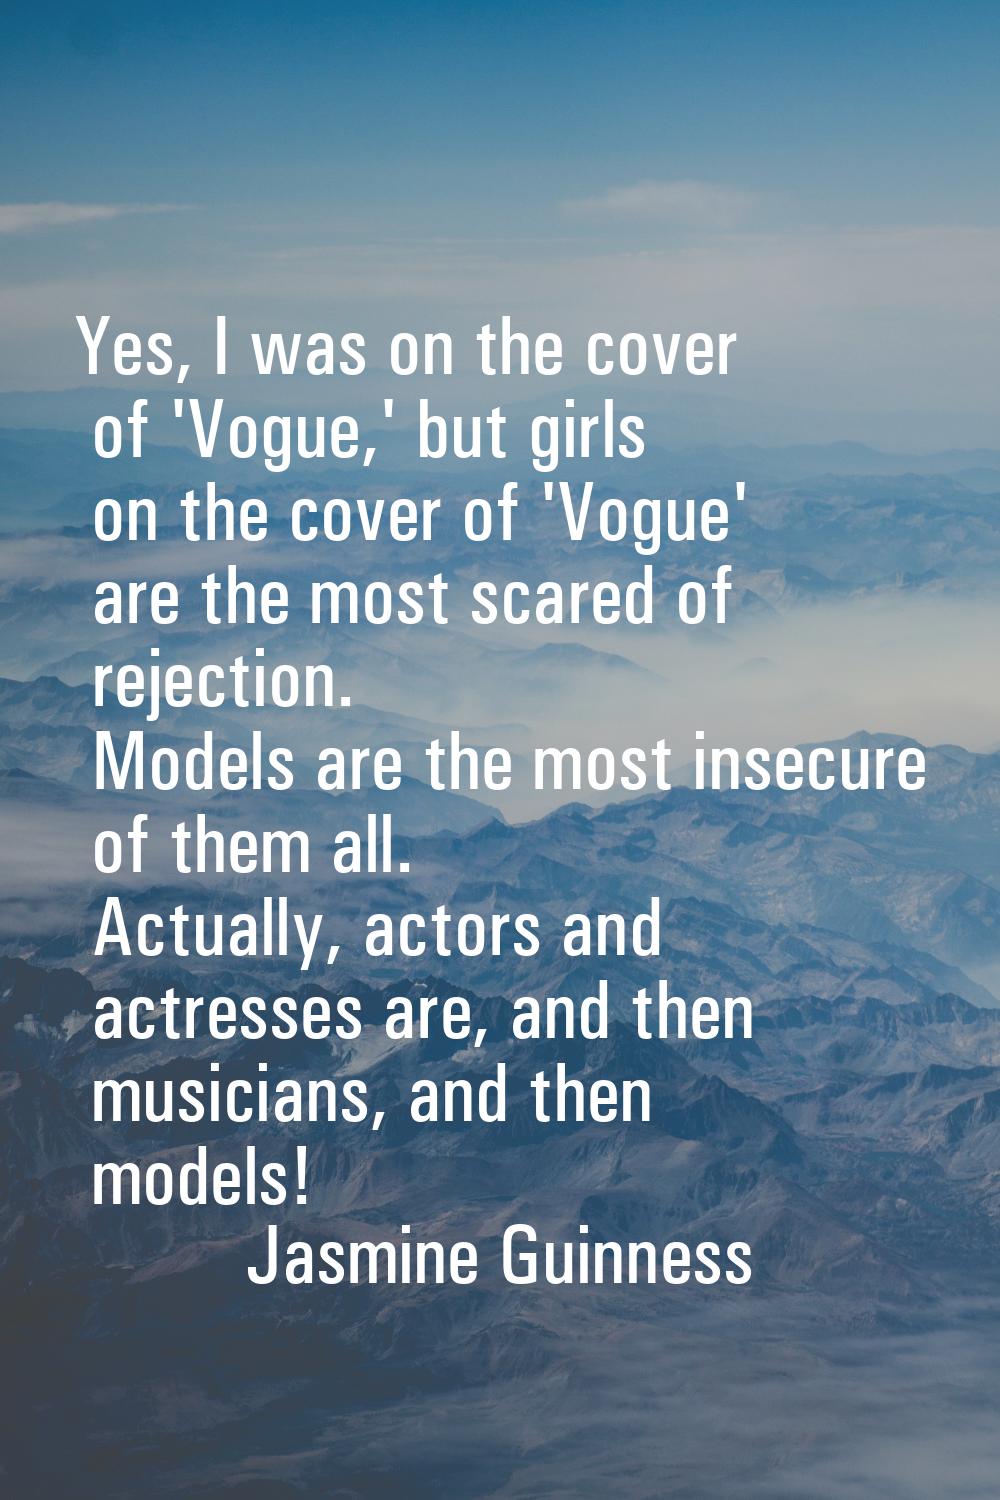 Yes, I was on the cover of 'Vogue,' but girls on the cover of 'Vogue' are the most scared of reject